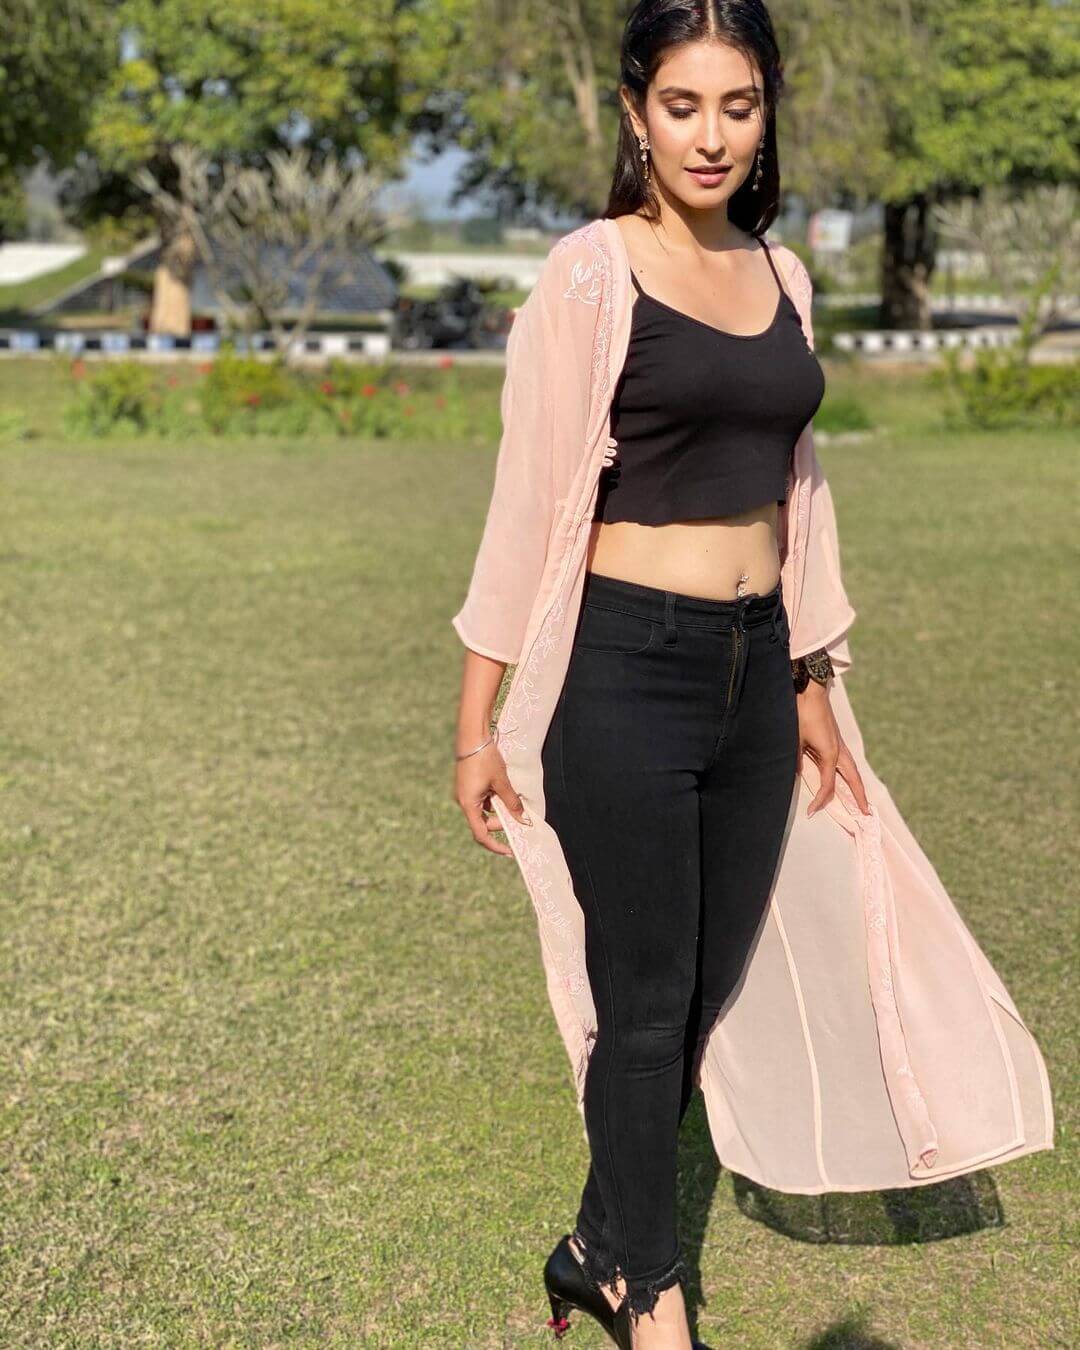 Navneet Kaur Dhillon Look Hot In Black Crop Top With Black Denim And Shrug Outfit Navneet Kaur Dhillon Outfit and Looks